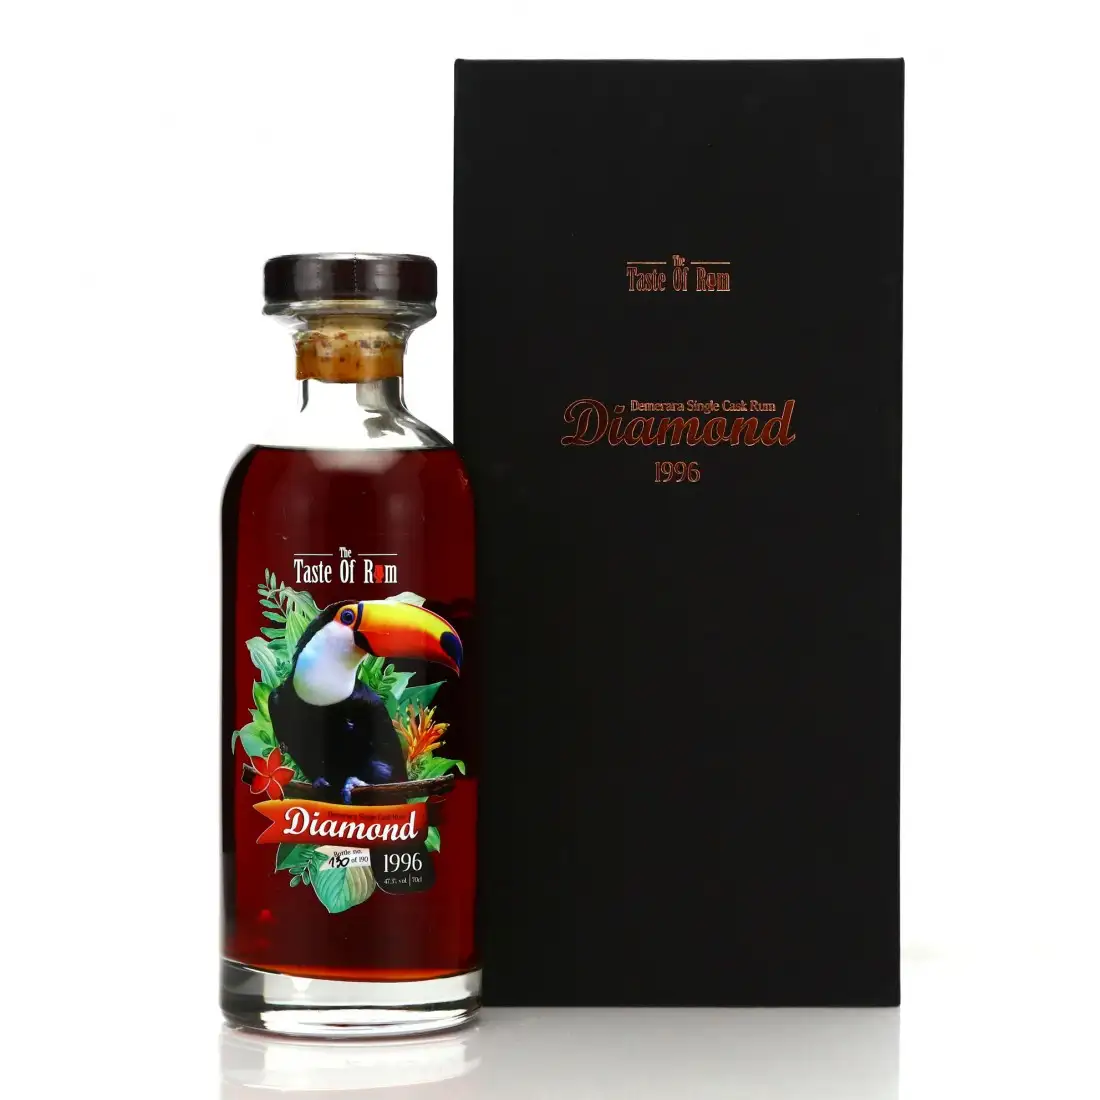 Image of the front of the bottle of the rum Demerara Single Cask Rum SVC